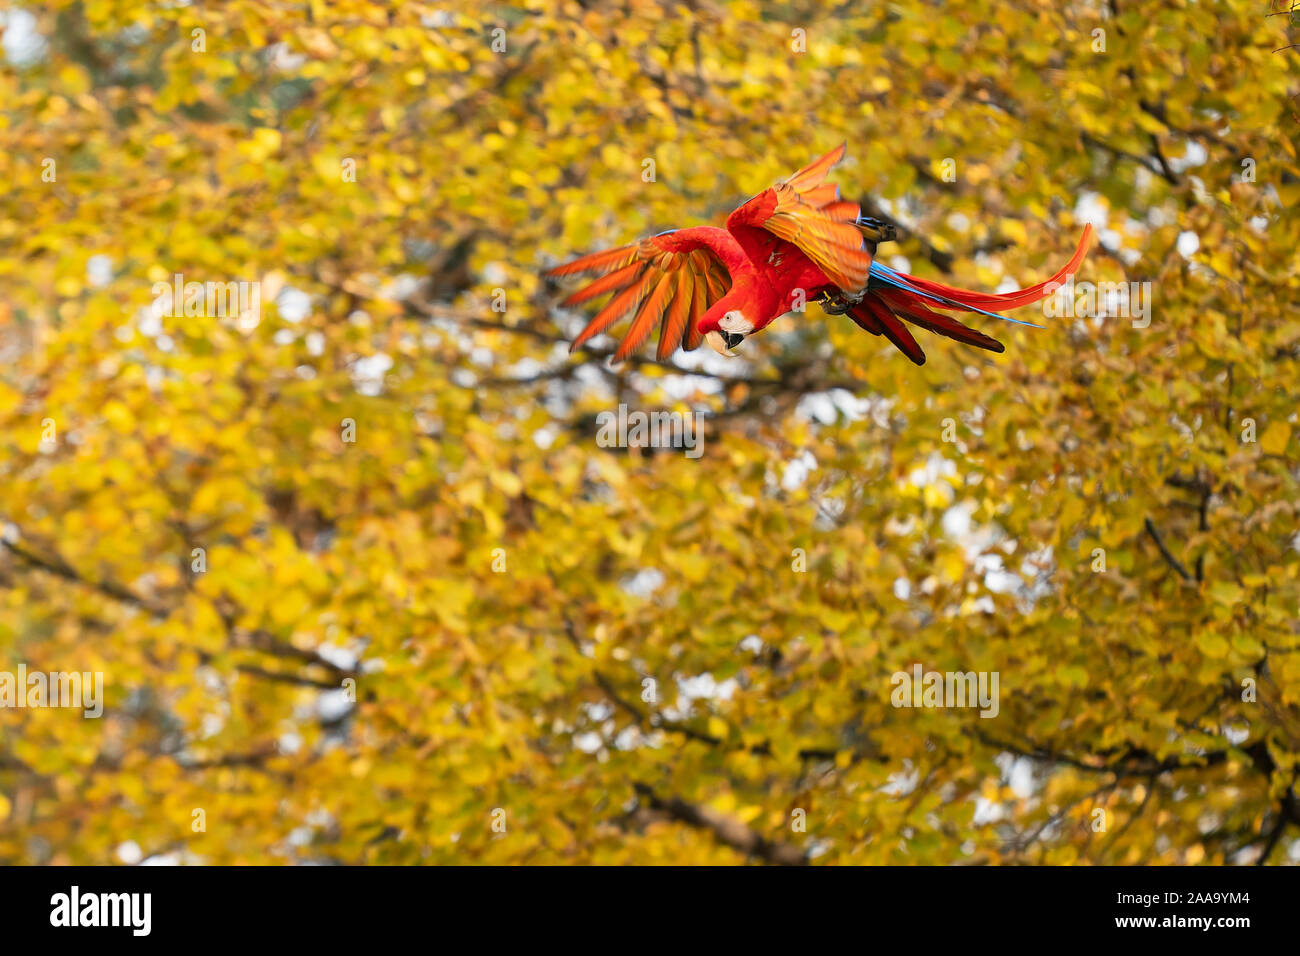 Flying scarlet macaw from side with yellow trees in the background. Stock Photo